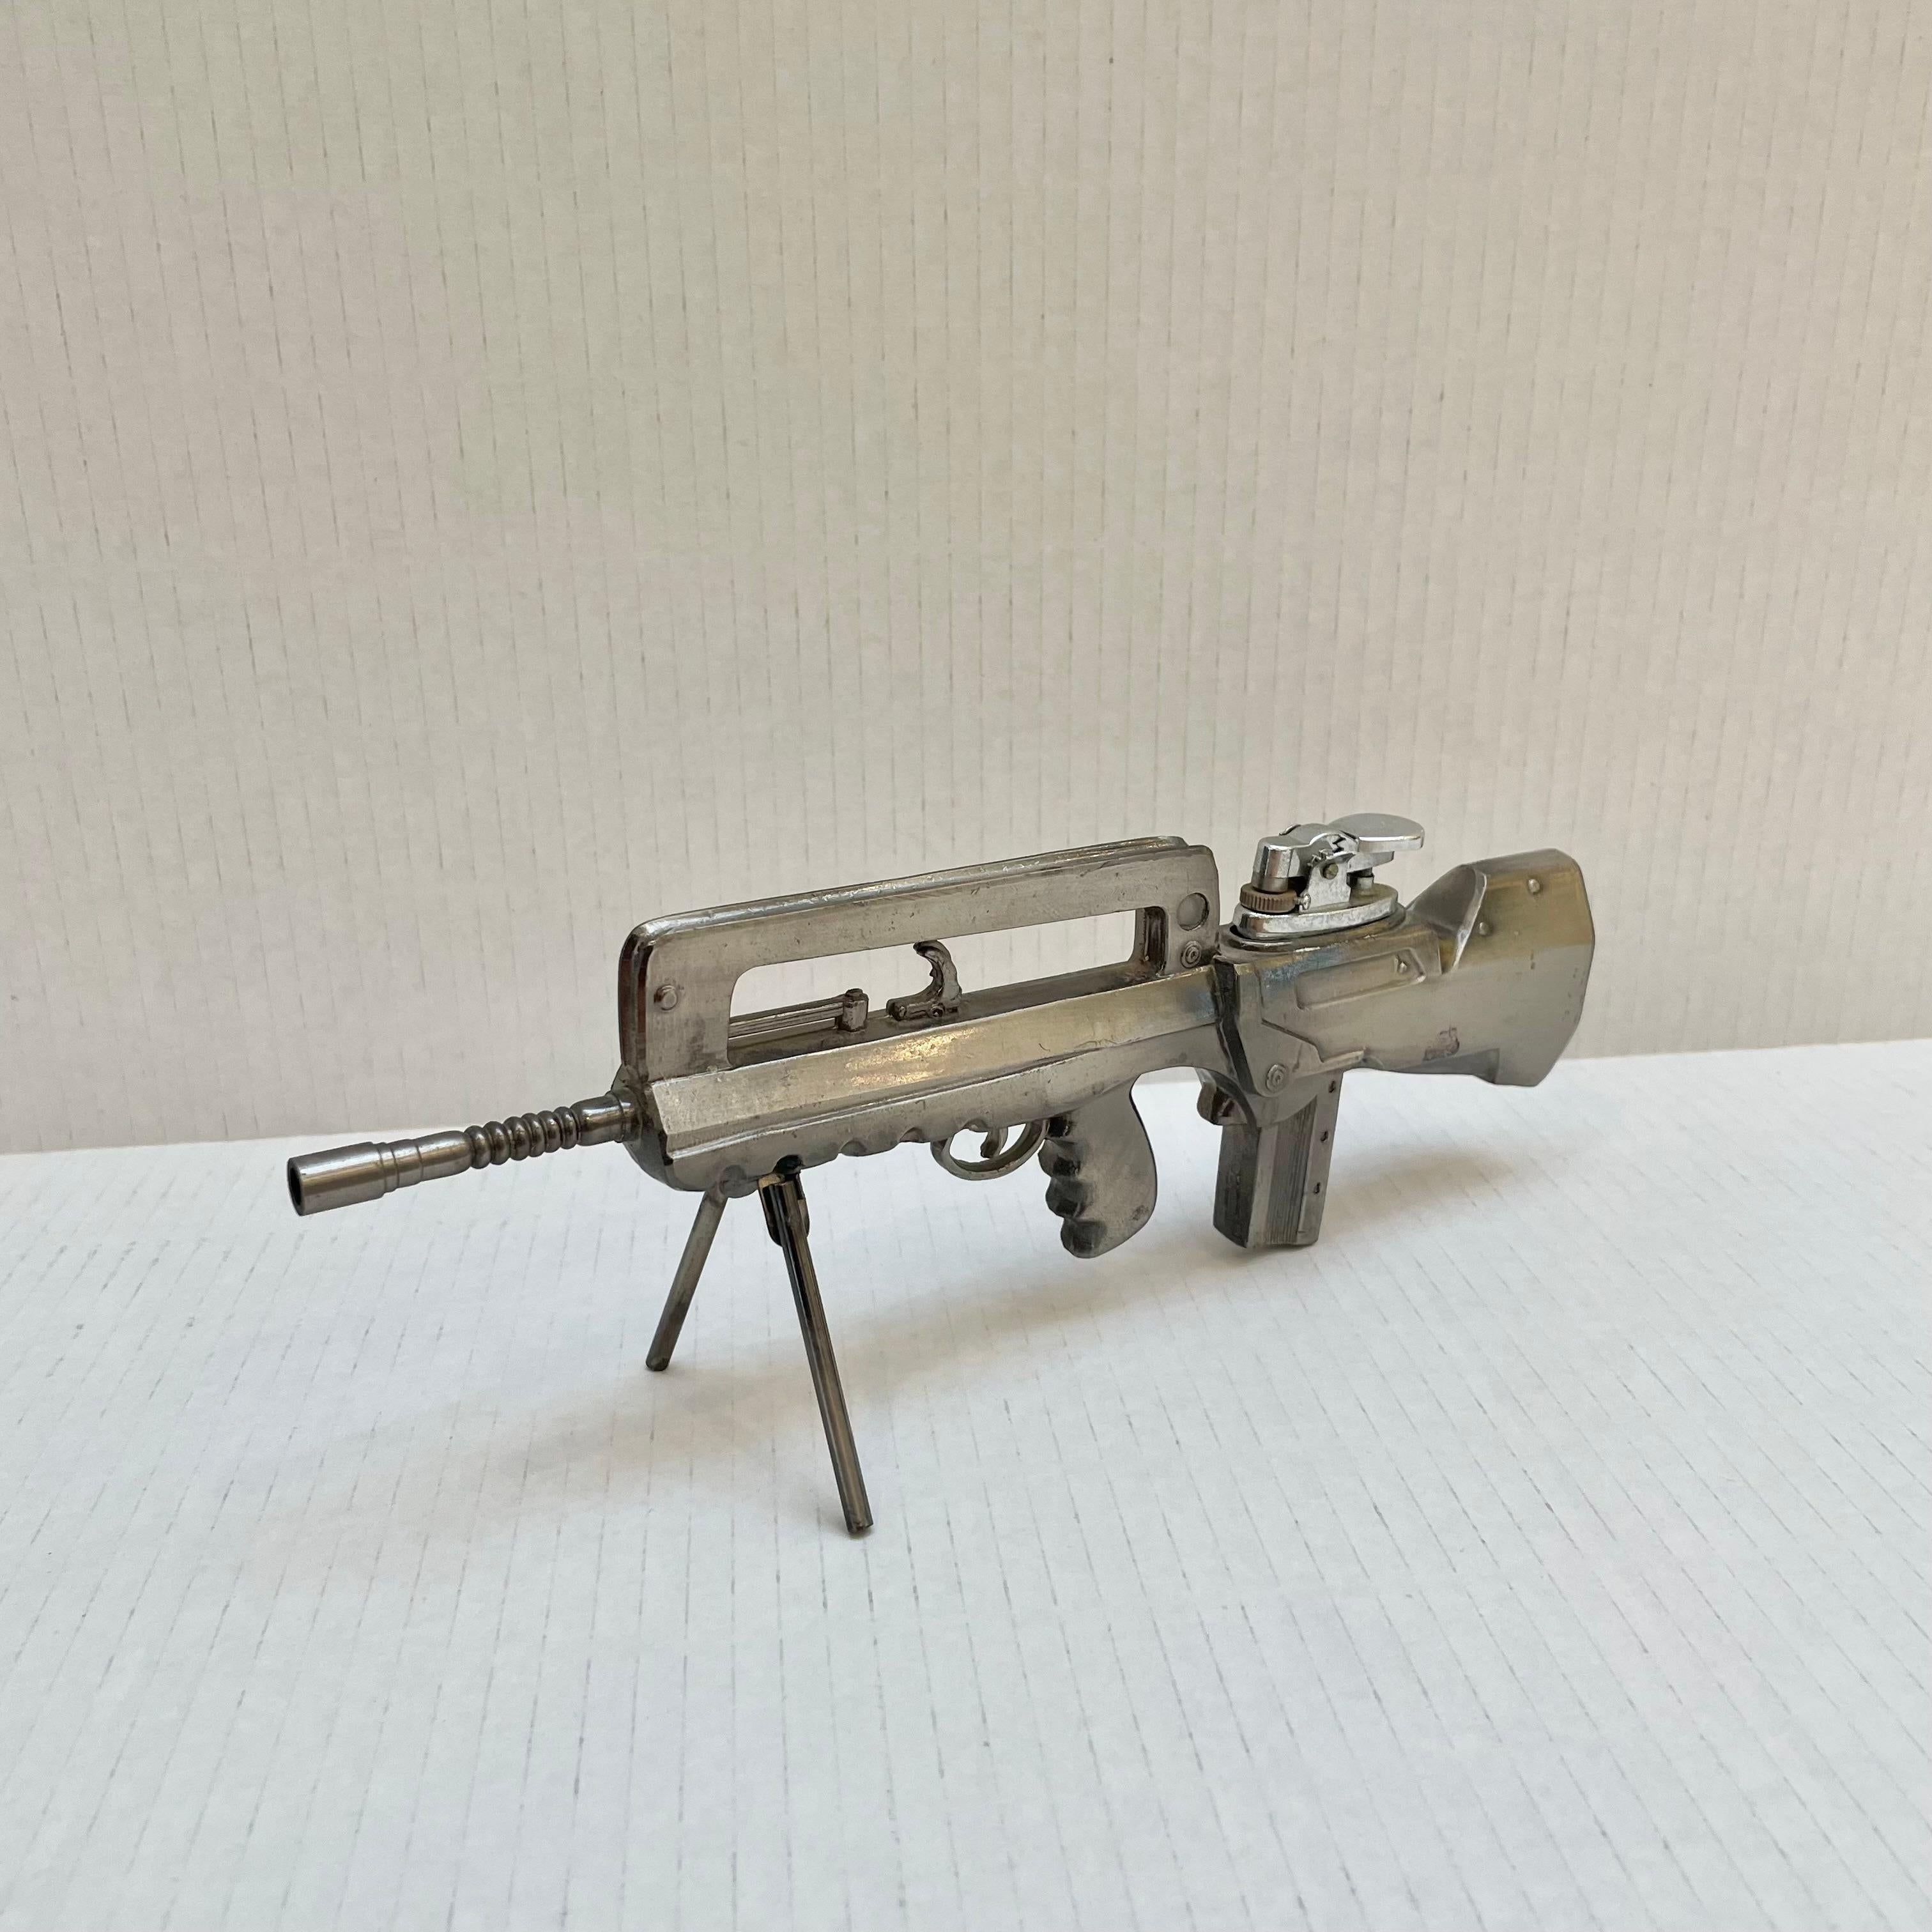 Cool vintage table lighter in the shape of a FAMAS (Fusil d'Assaut de la Manufacture d'Armes de Saint-Étienne) assault rifle. Made of metal and stands up on its own via bipod arms which can be folded up and down. Medium patina giving this piece a